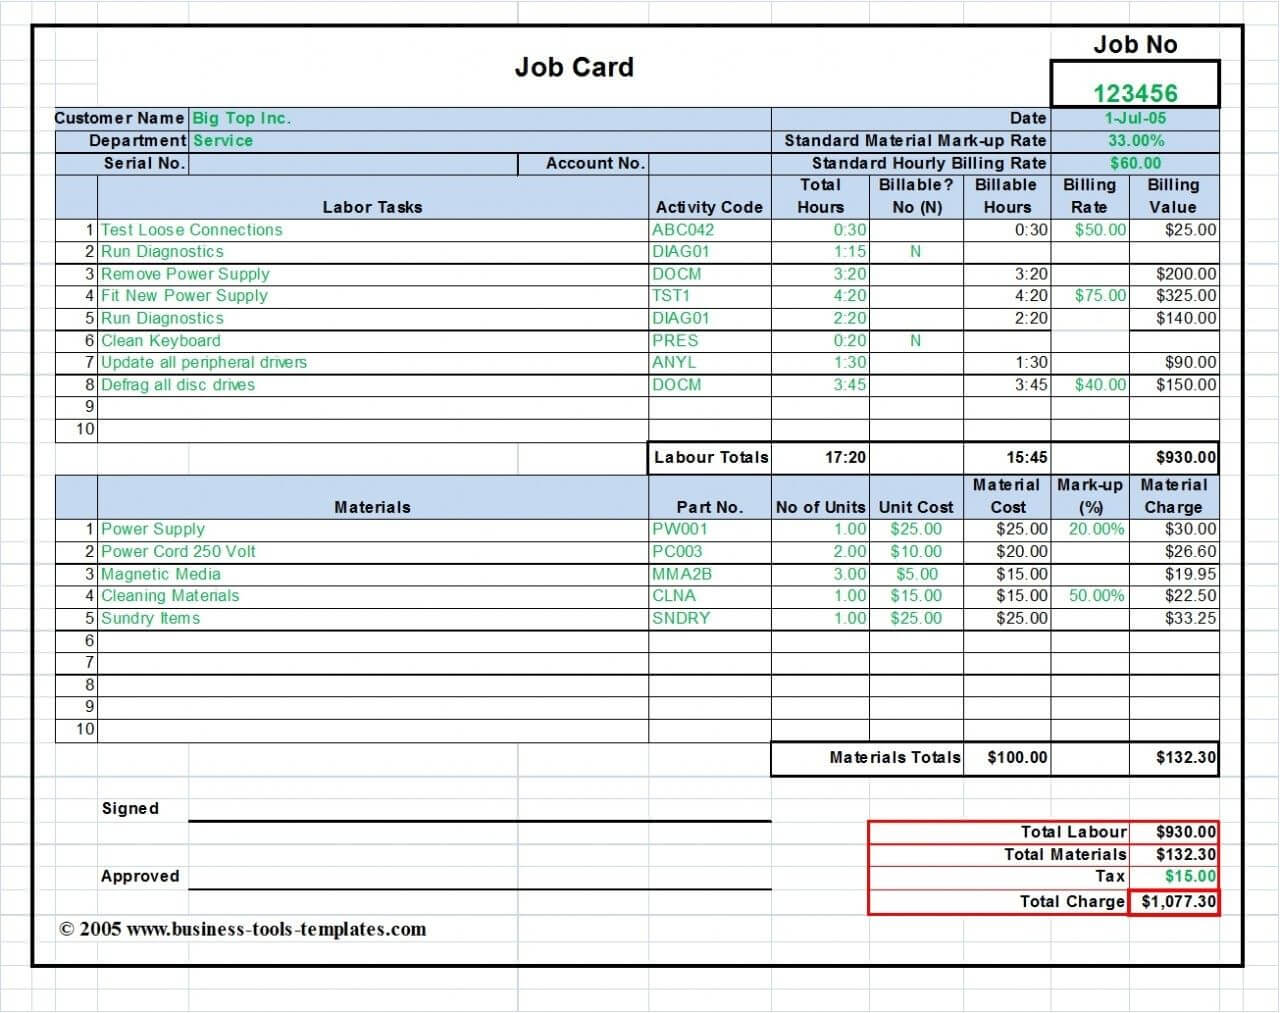 Workshop Job Card Template Excel, Labor & Material Cost Inside Job Cost Report Template Excel